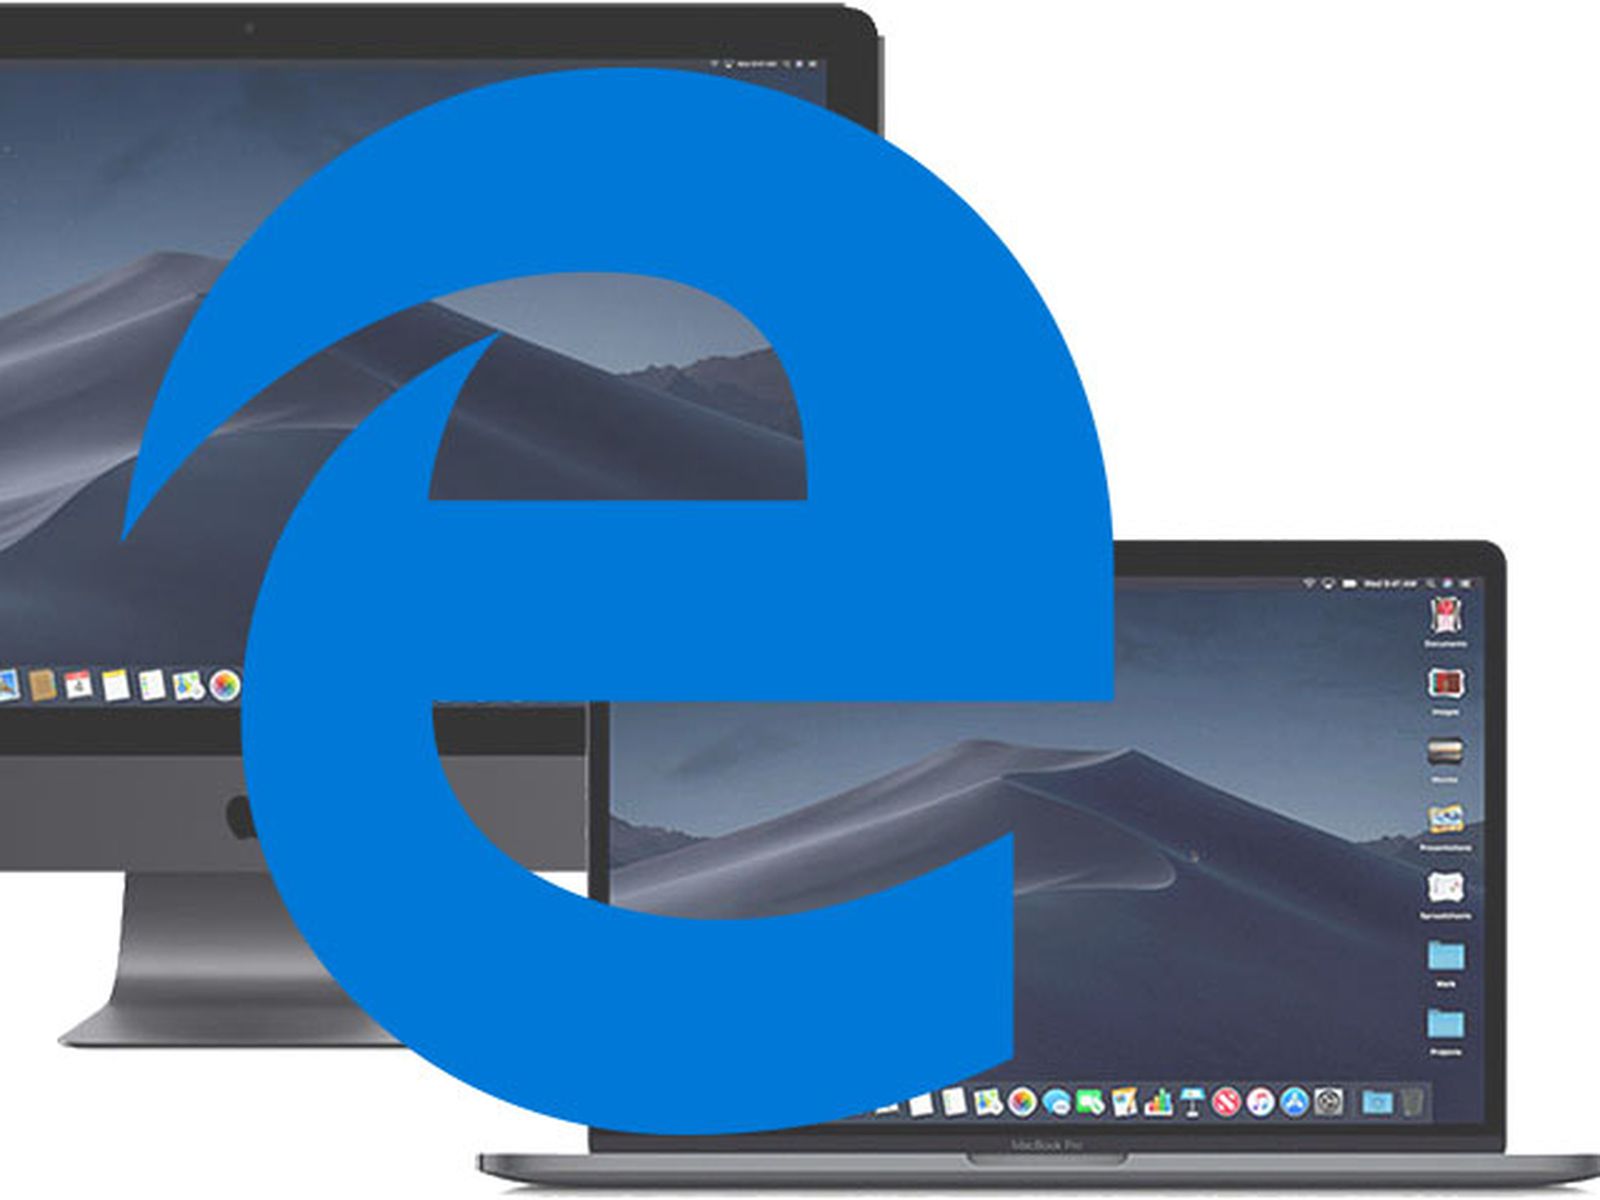 Microsoft Edge will soon get a couple of useful new features